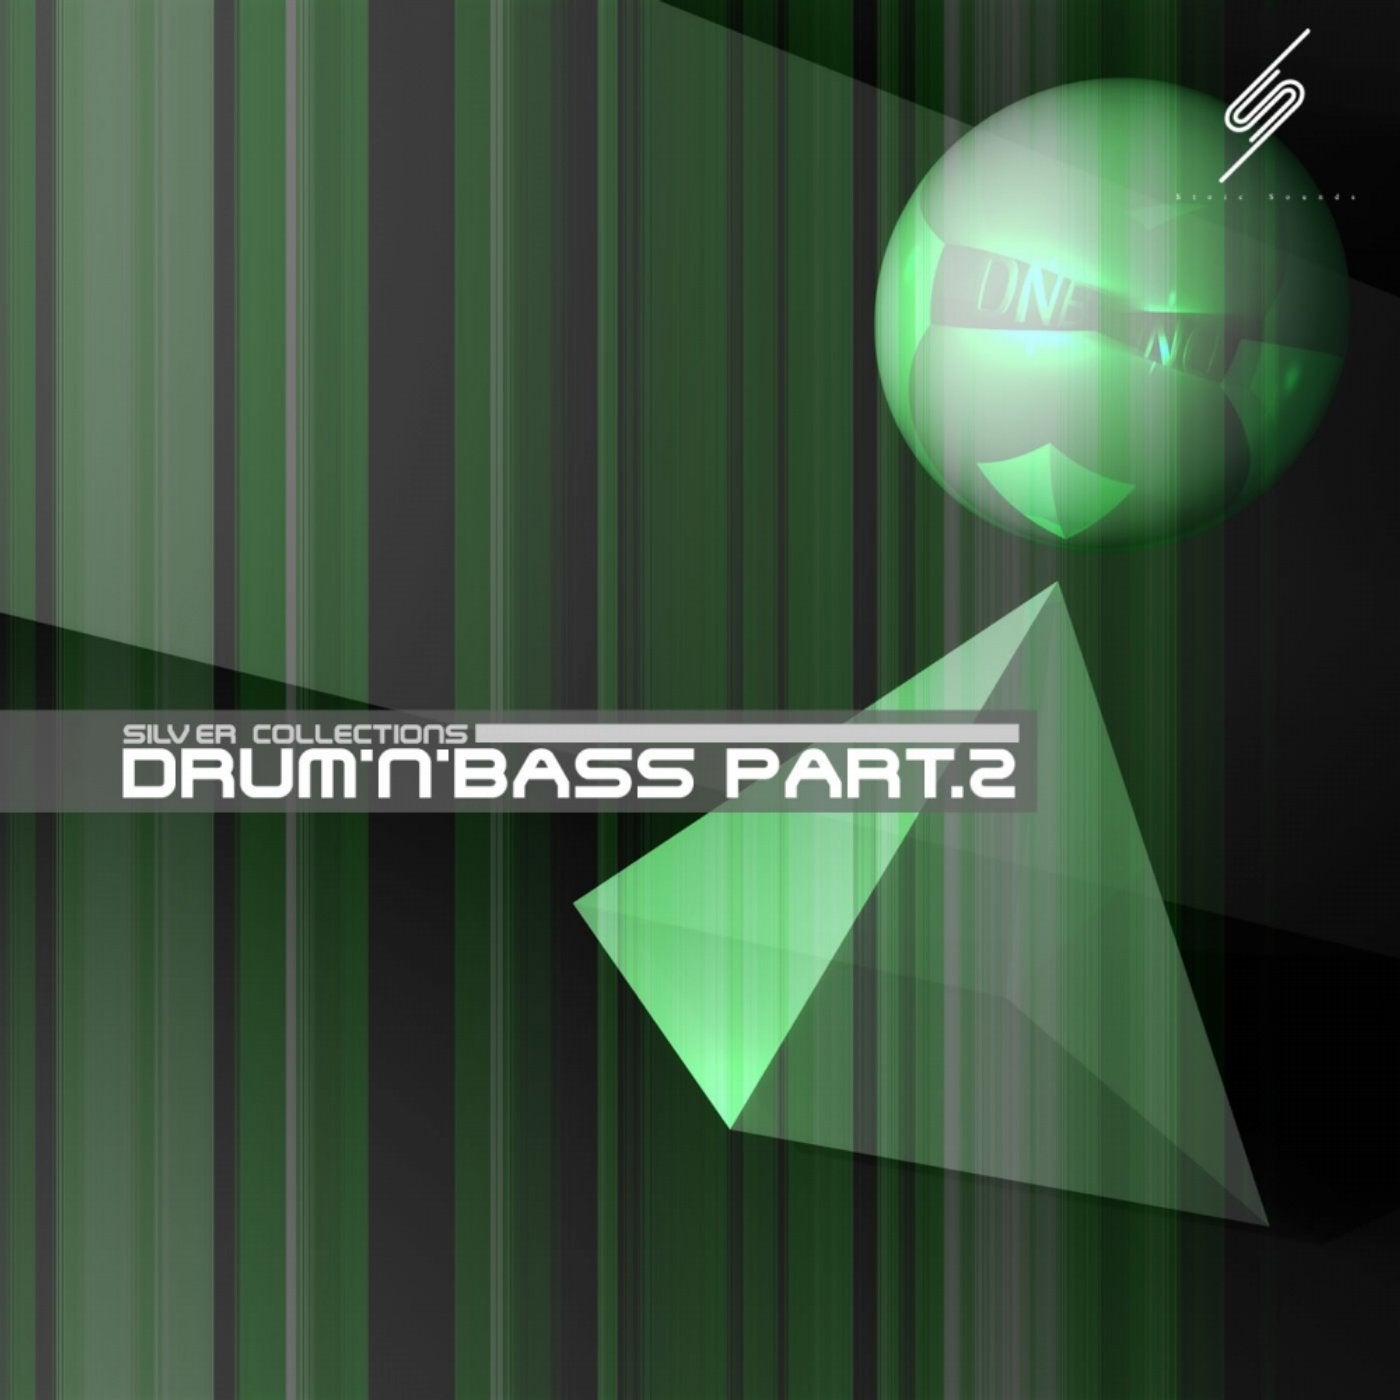 Silver Collections: Drum'n'bass, Pt. 2